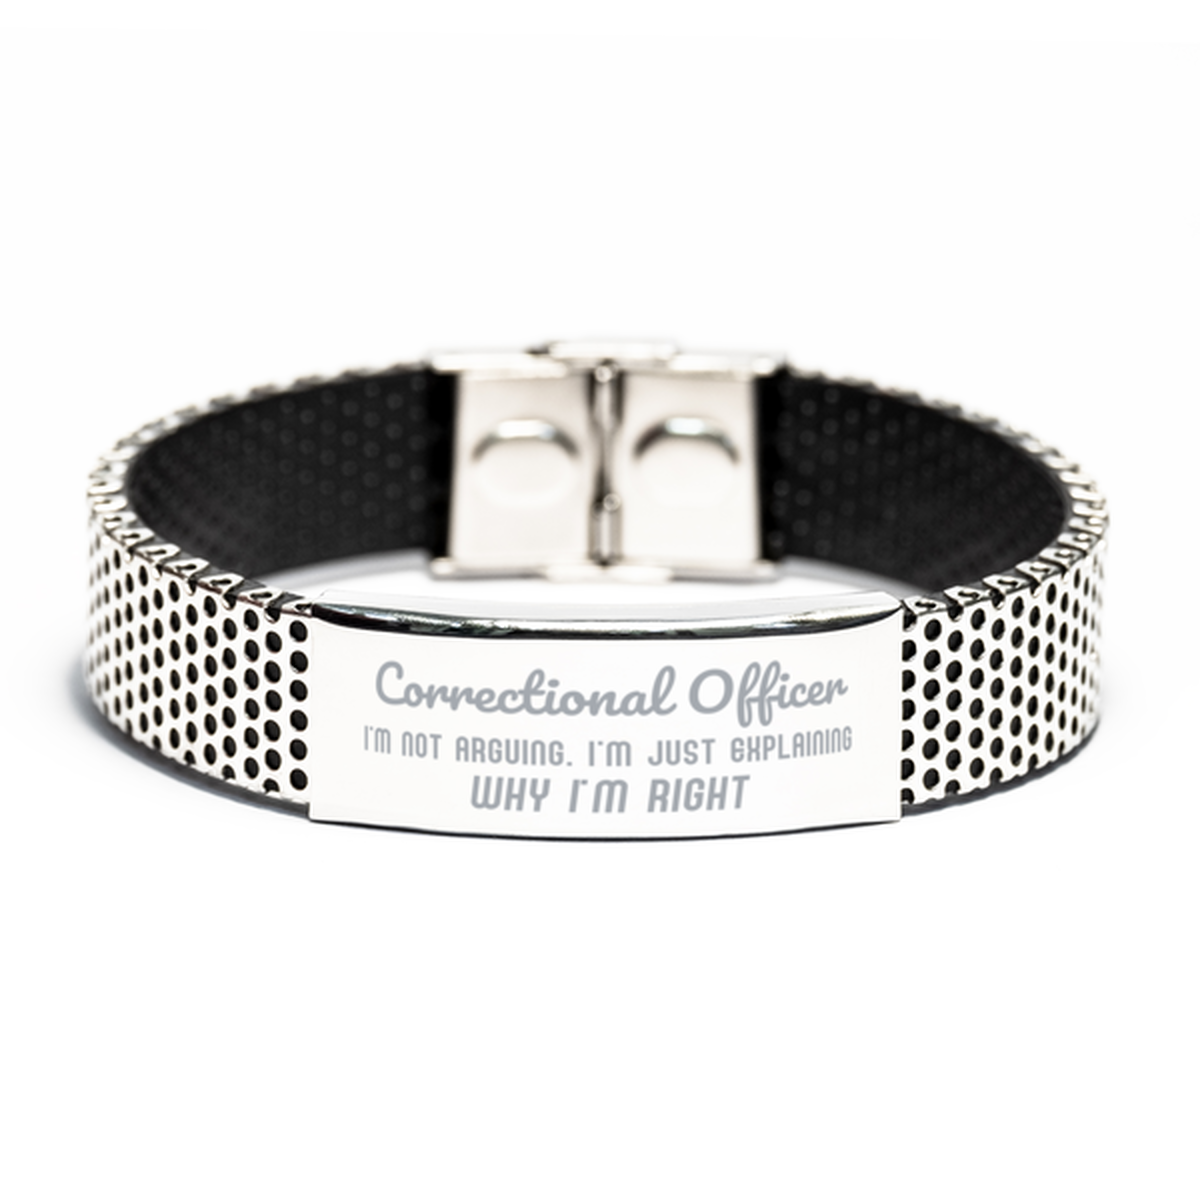 Correctional Officer I'm not Arguing. I'm Just Explaining Why I'm RIGHT Stainless Steel Bracelet, Funny Saying Quote Correctional Officer Gifts For Correctional Officer Graduation Birthday Christmas Gifts for Men Women Coworker